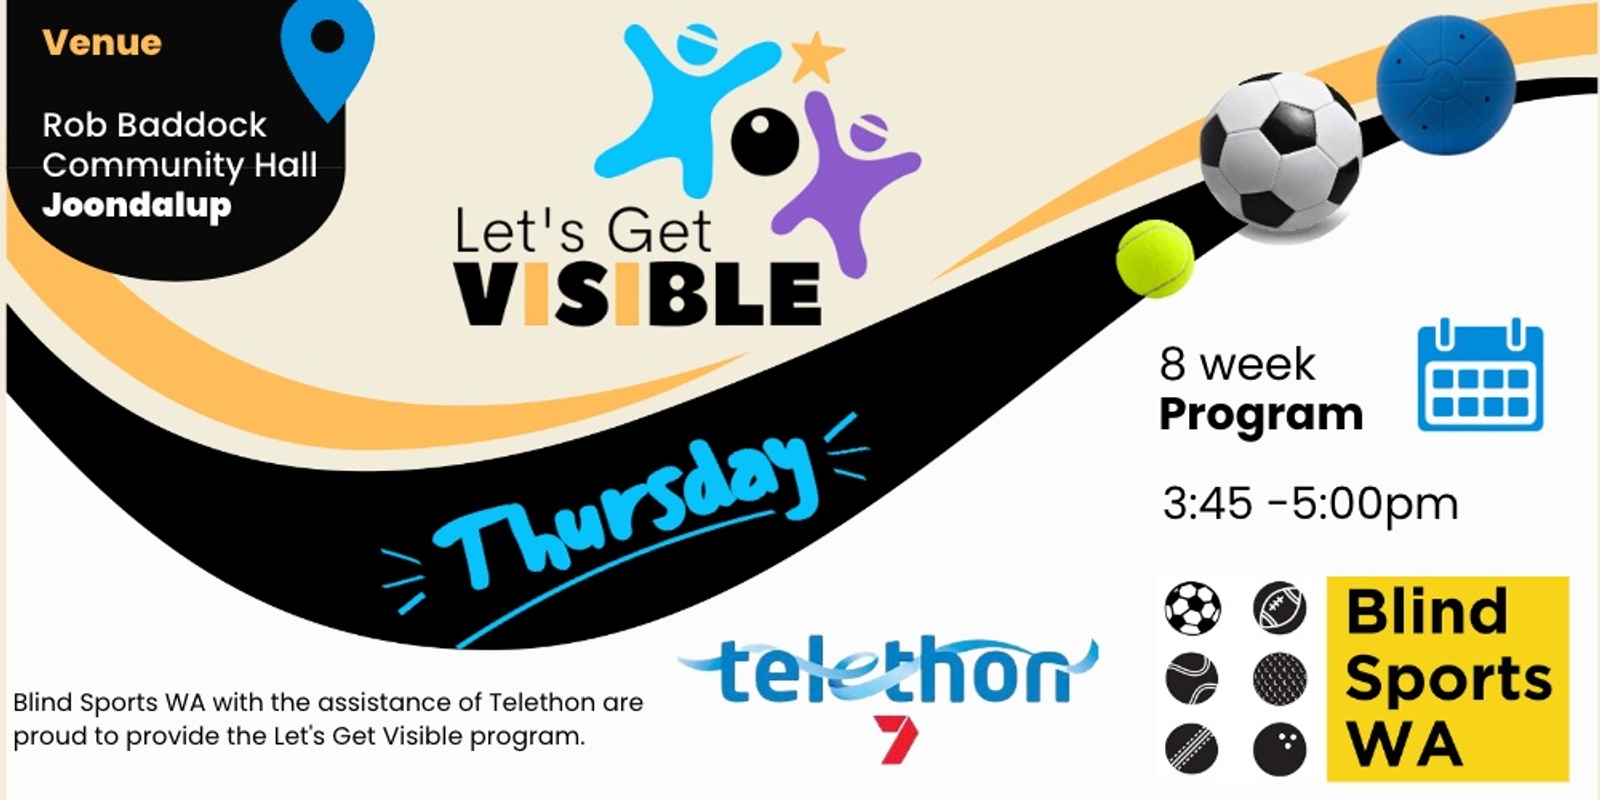 Banner image for Let's Get Visible - Thursday Sessions, Rob Baddock Hall Joondalup